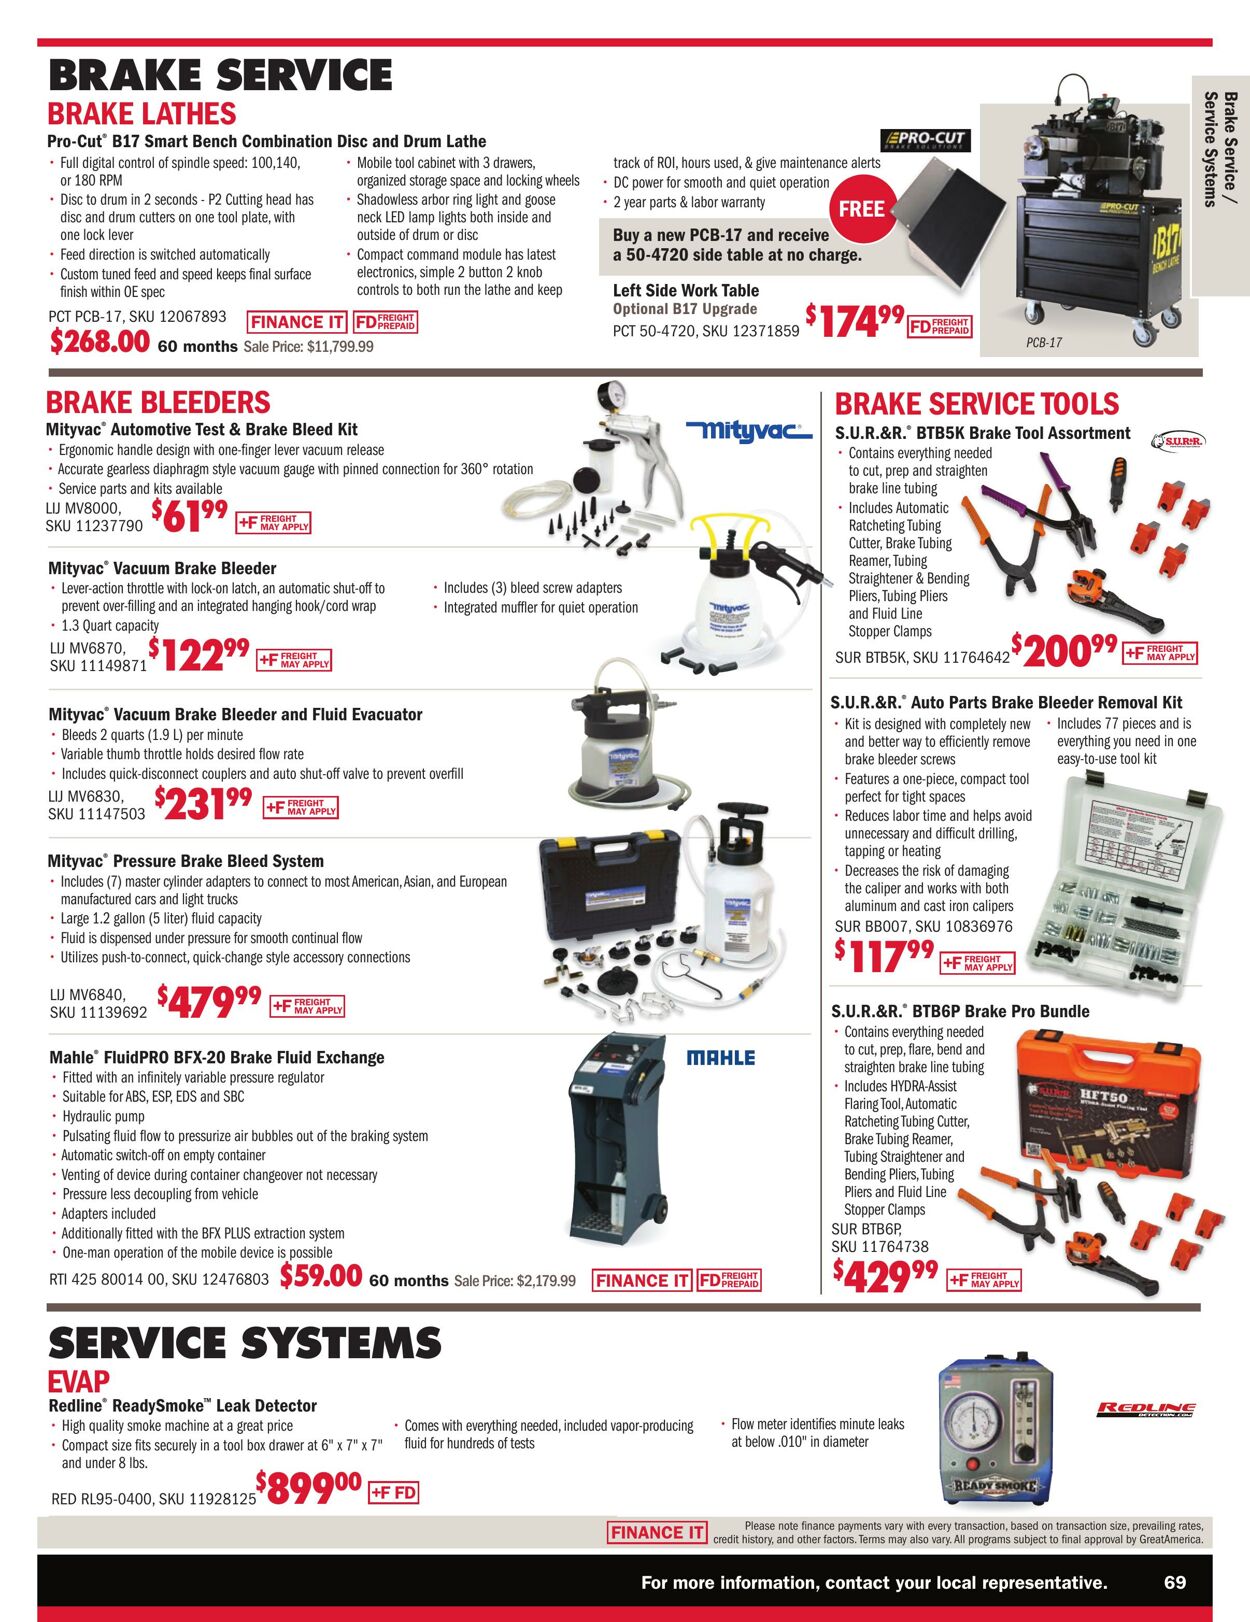 Weekly ad CarQuest 07/03/2022 - 10/01/2022